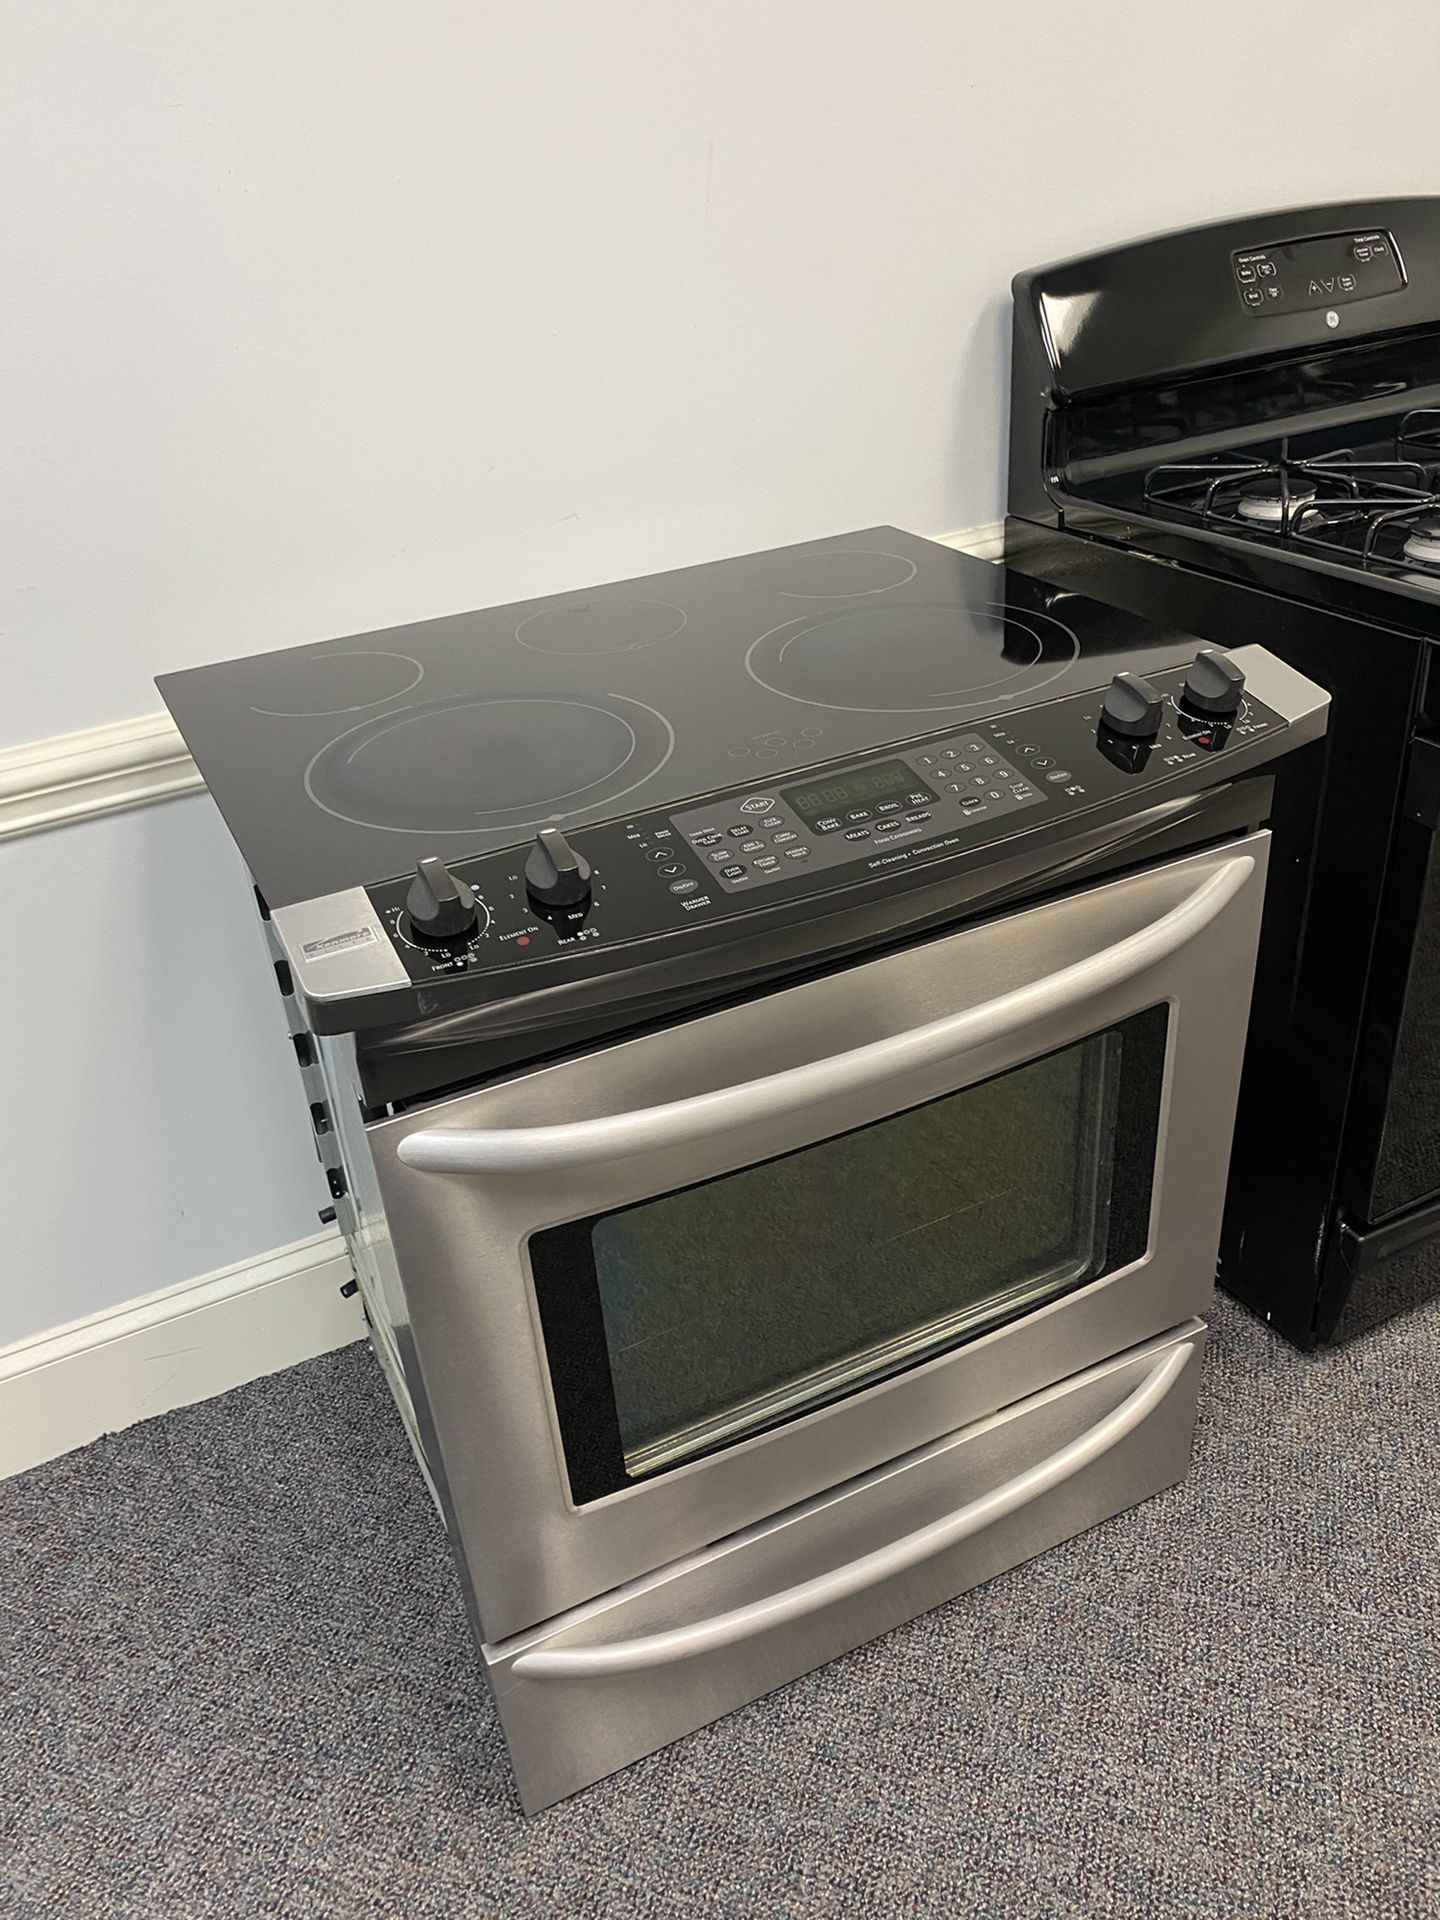 KENMORE ELITE STAINLESS 5 BURNER GLASS TOP STOVE WITH CONVECTION OVEN 4 MONTH WARRANTY